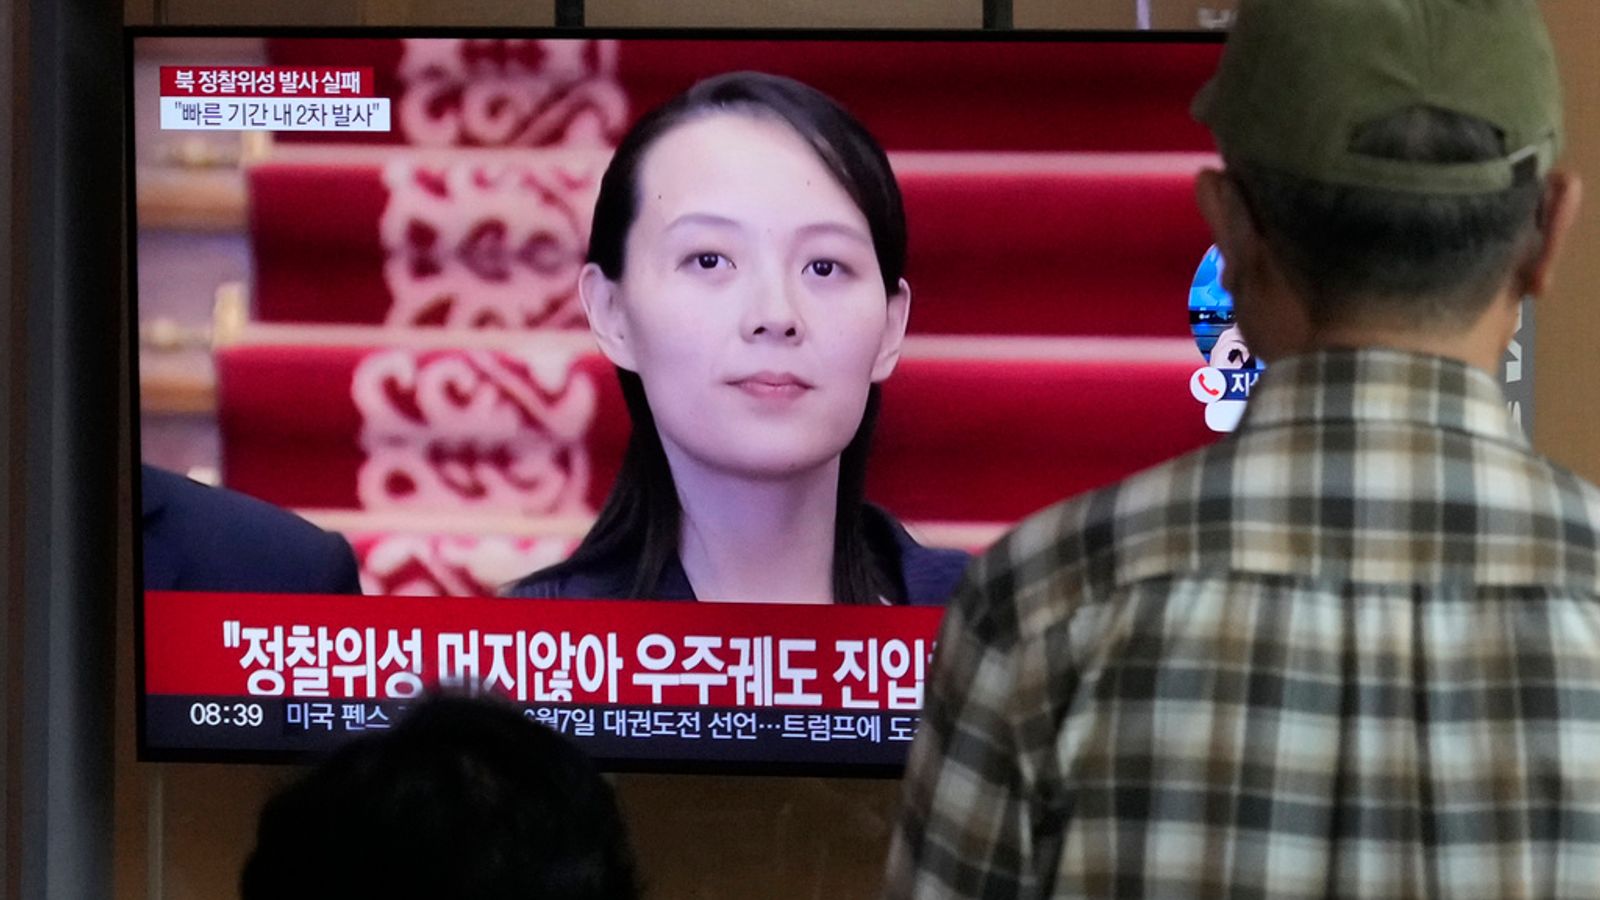 Kim Jong Un's sister vows North Korea will succeed in launching spy satellite